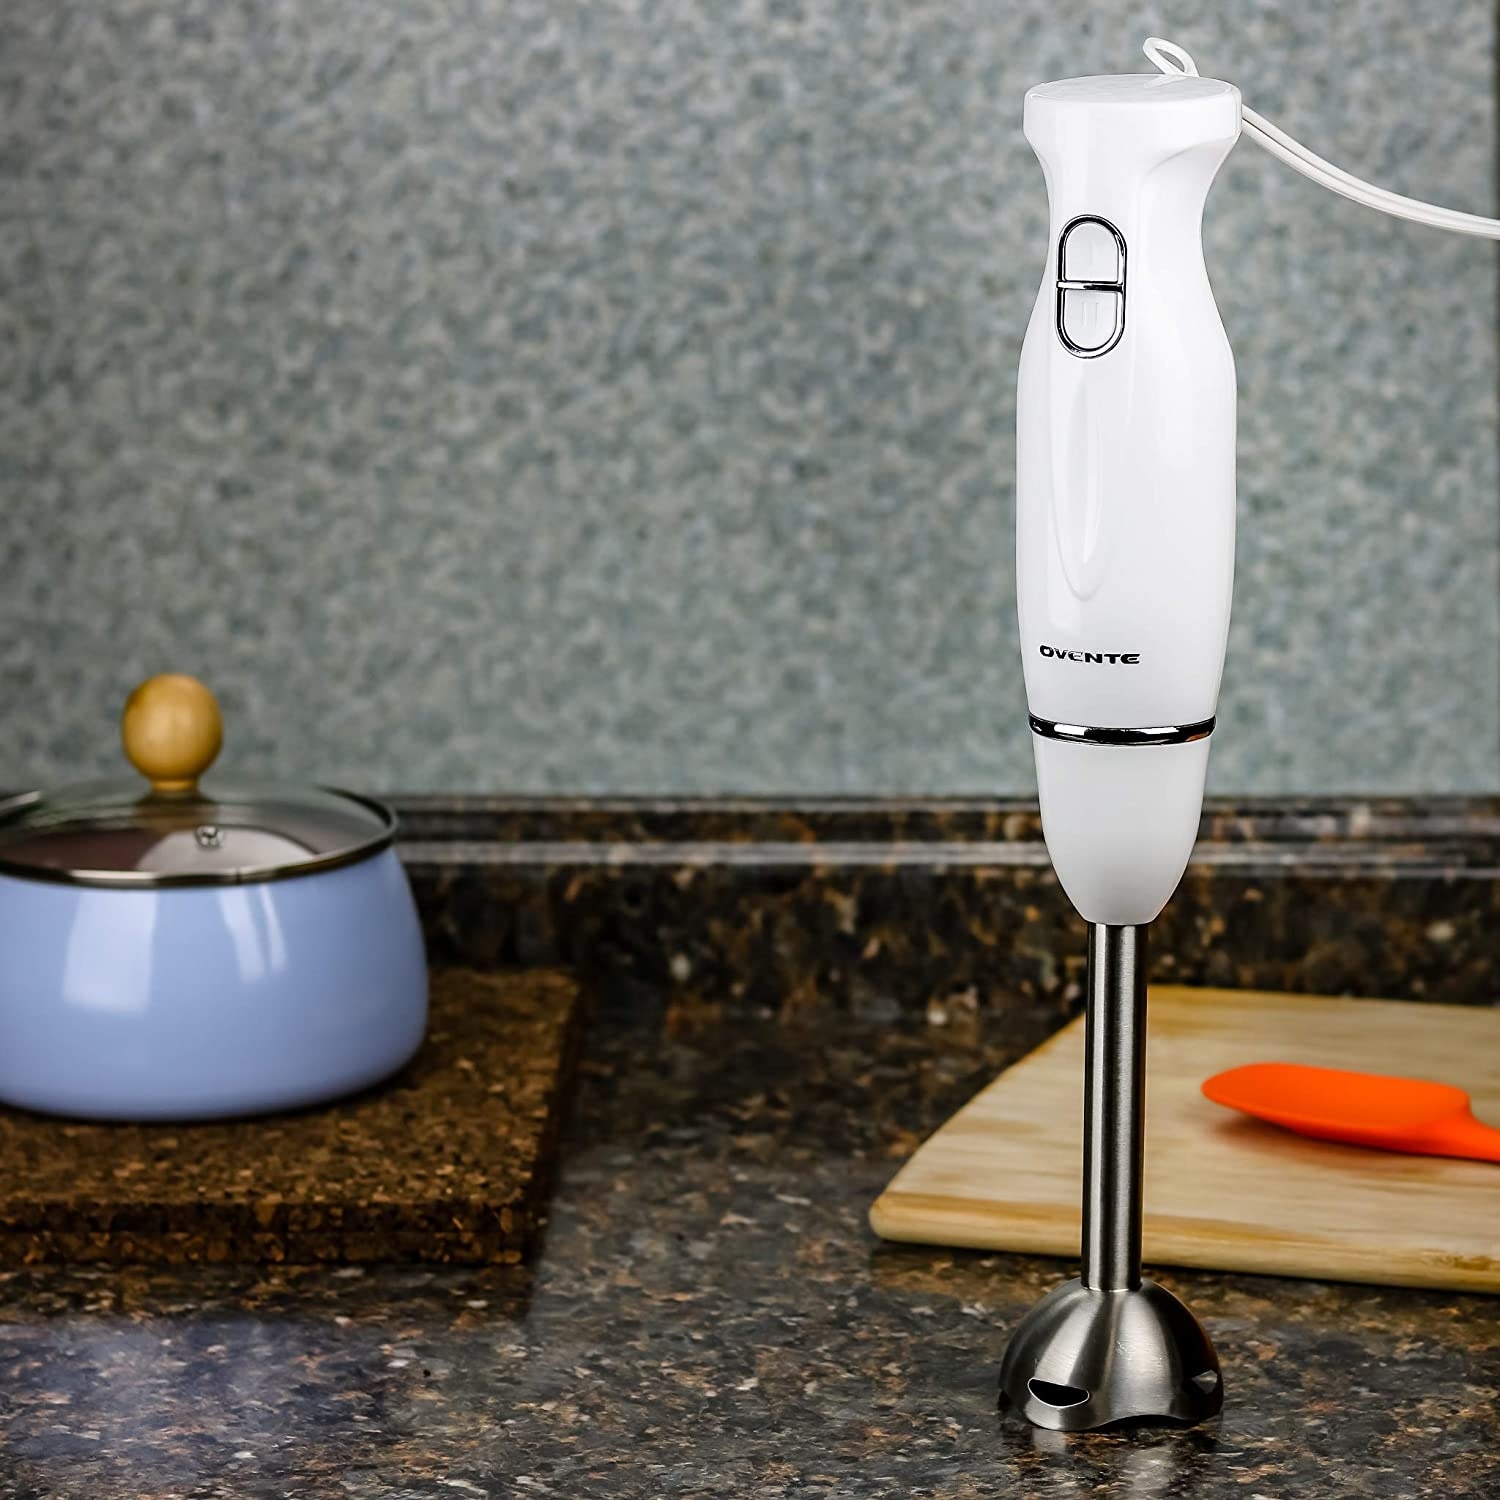 https://ak1.ostkcdn.com/images/products/is/images/direct/44c29857136dc318b13e7f2ab46b1ed33e581847/Ovente-Immersion-Hand-Blender%2C-2-Mix-Blending-Speed-%28HS560-Series%29.jpg